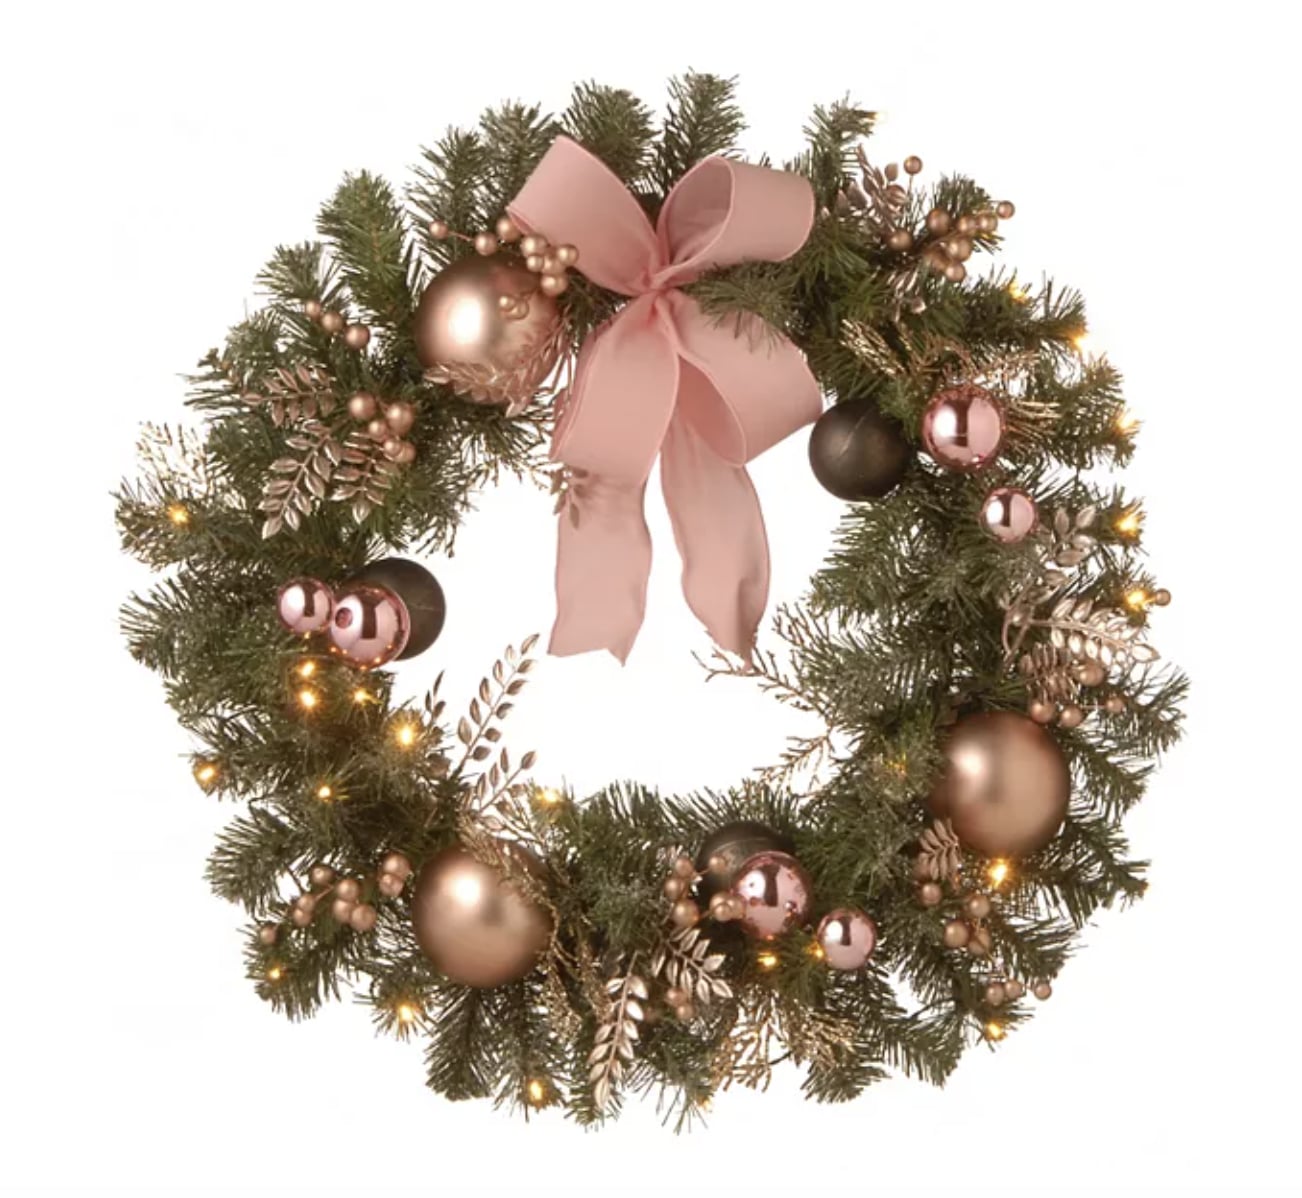 Decorative Wreaths These Pink Holiday Wreaths Will Make Your Decor Stand Out | POPSUGAR Home